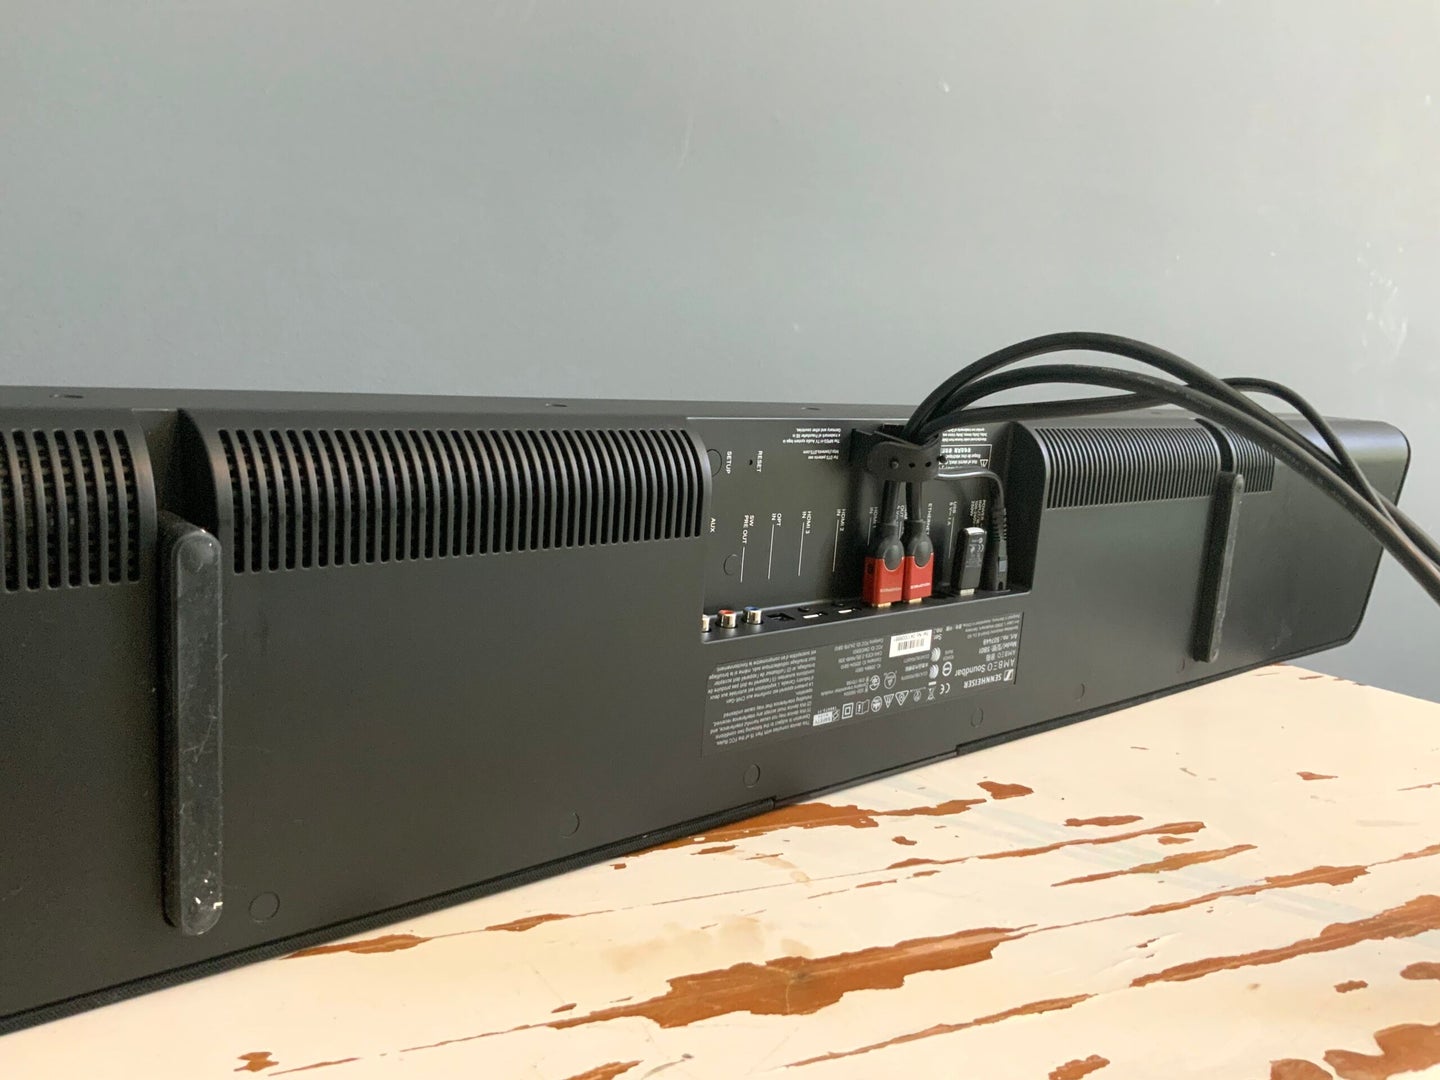 Do I need to connect optical cable for soundbar?